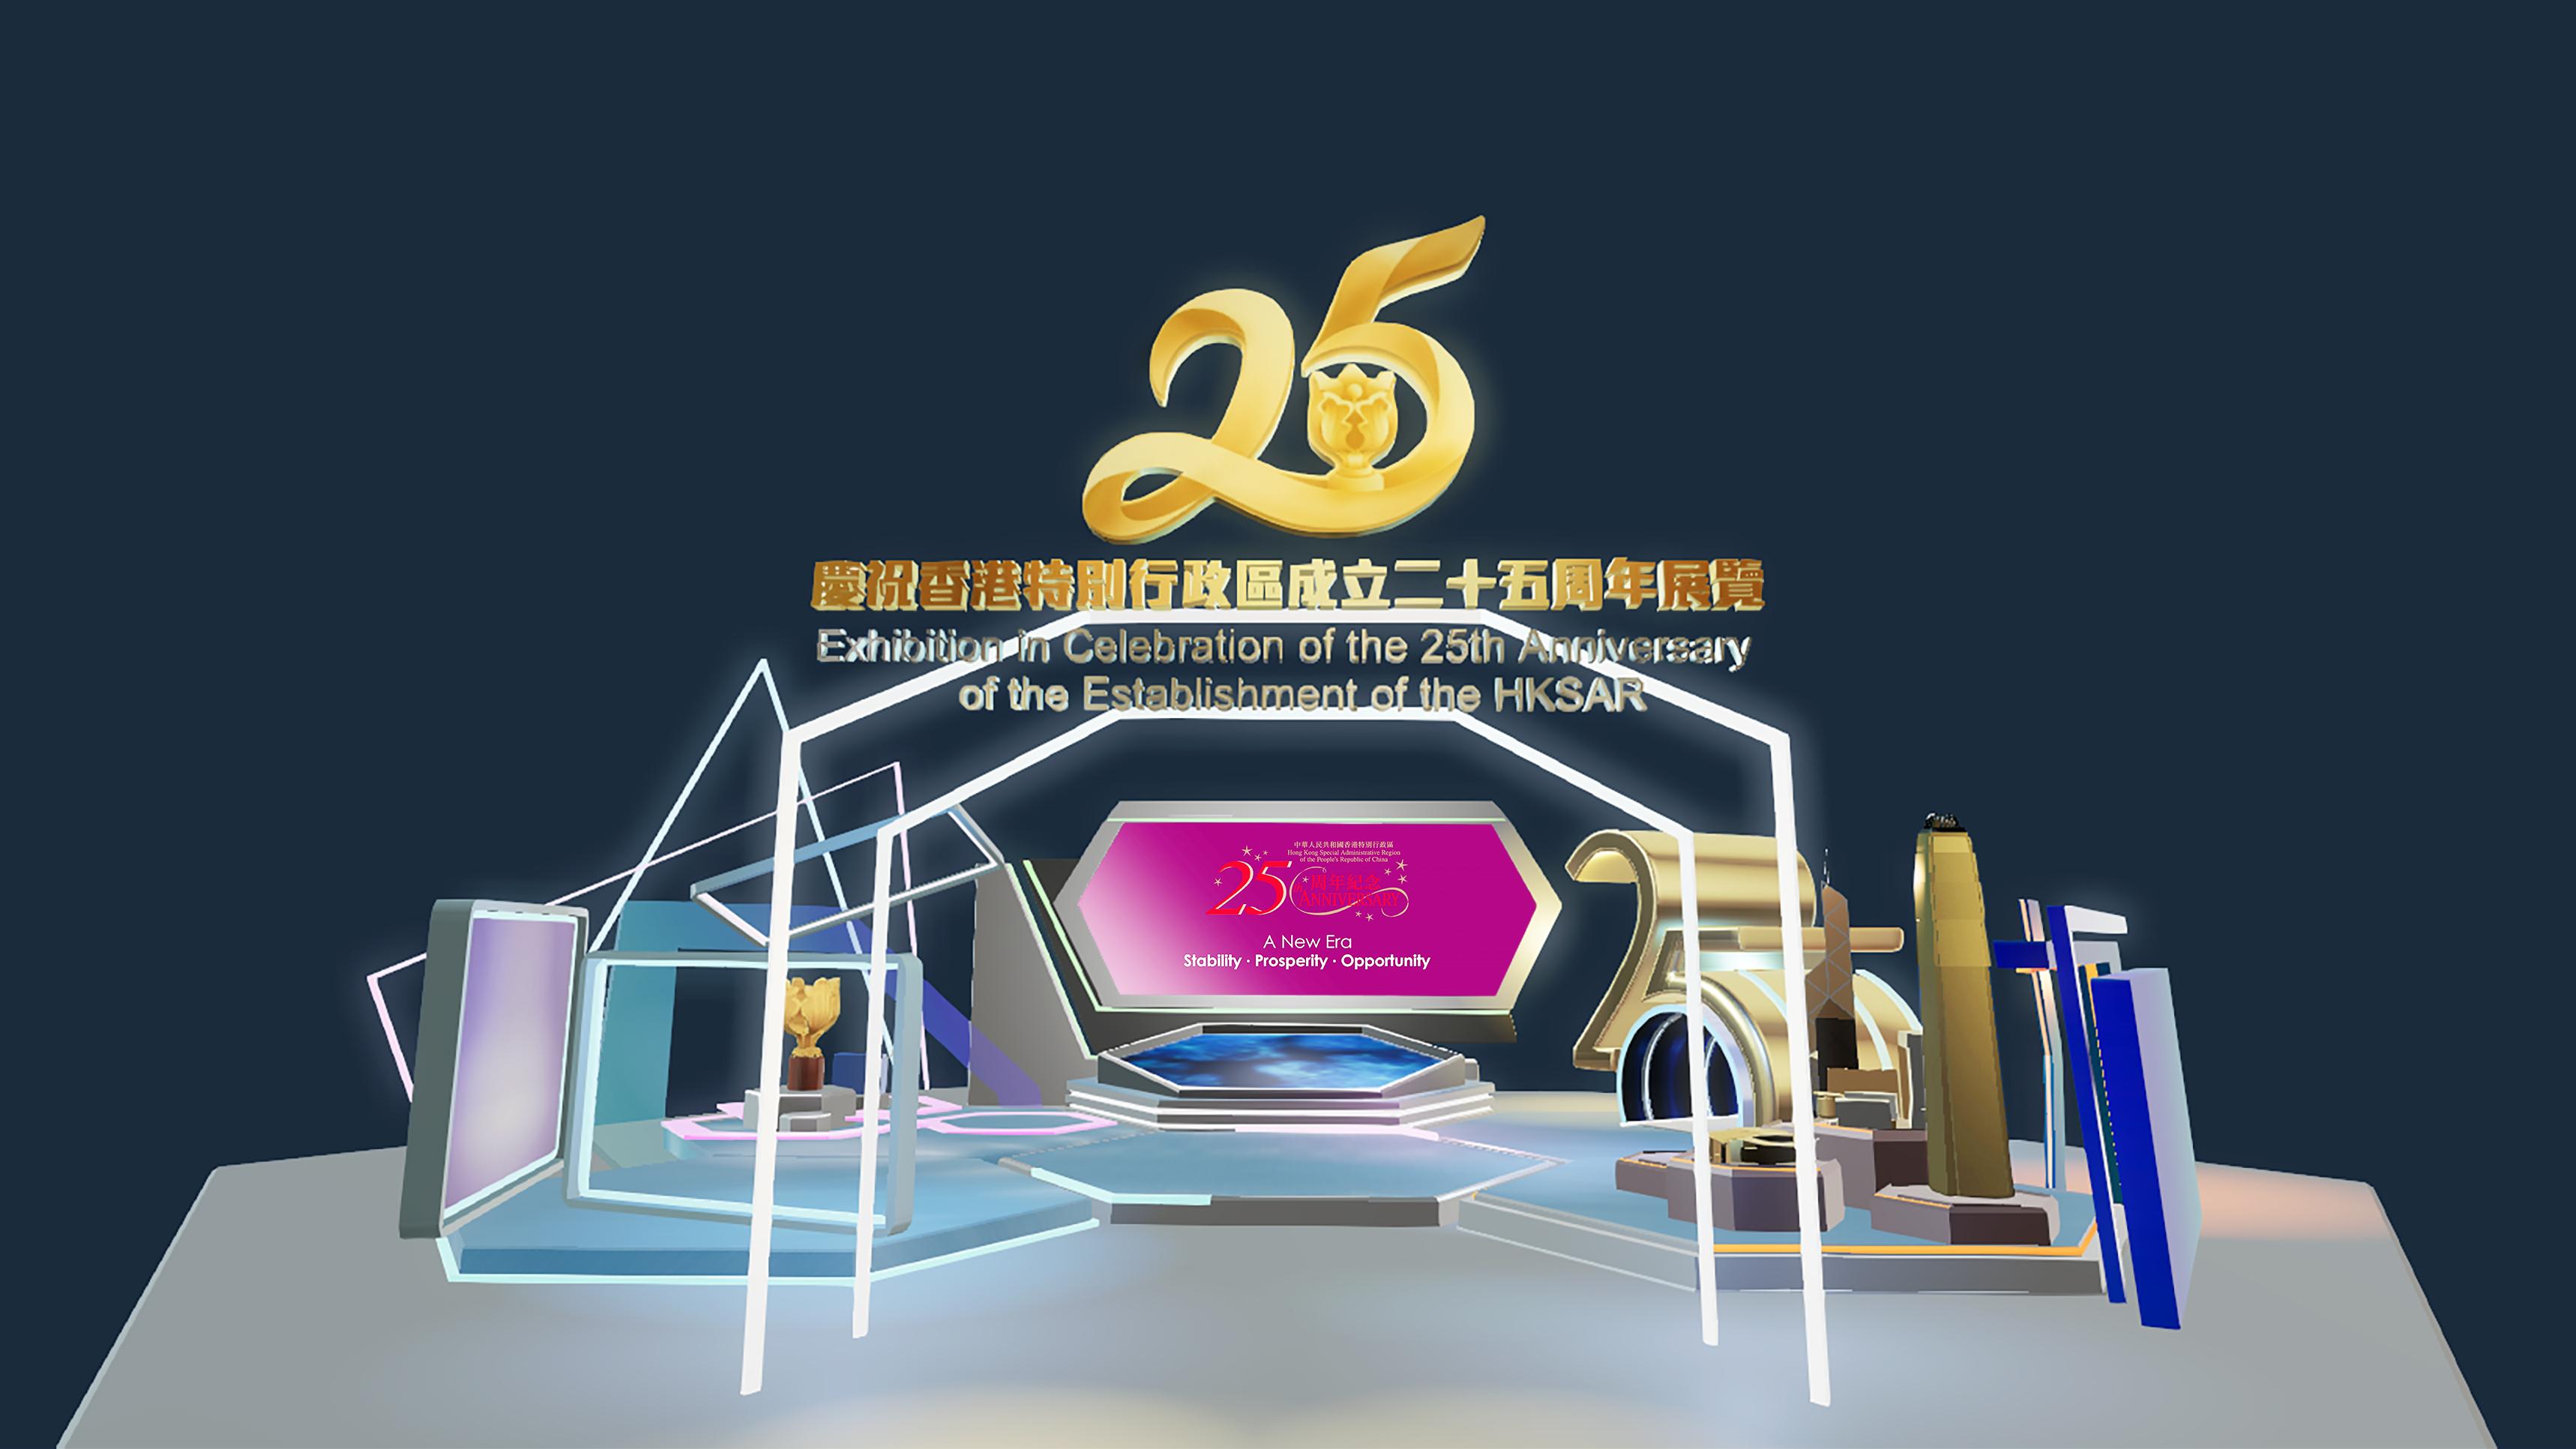 The online exhibition celebrating the 25th anniversary of the establishment of the Hong Kong Special Administrative Region was launched today (June 17).